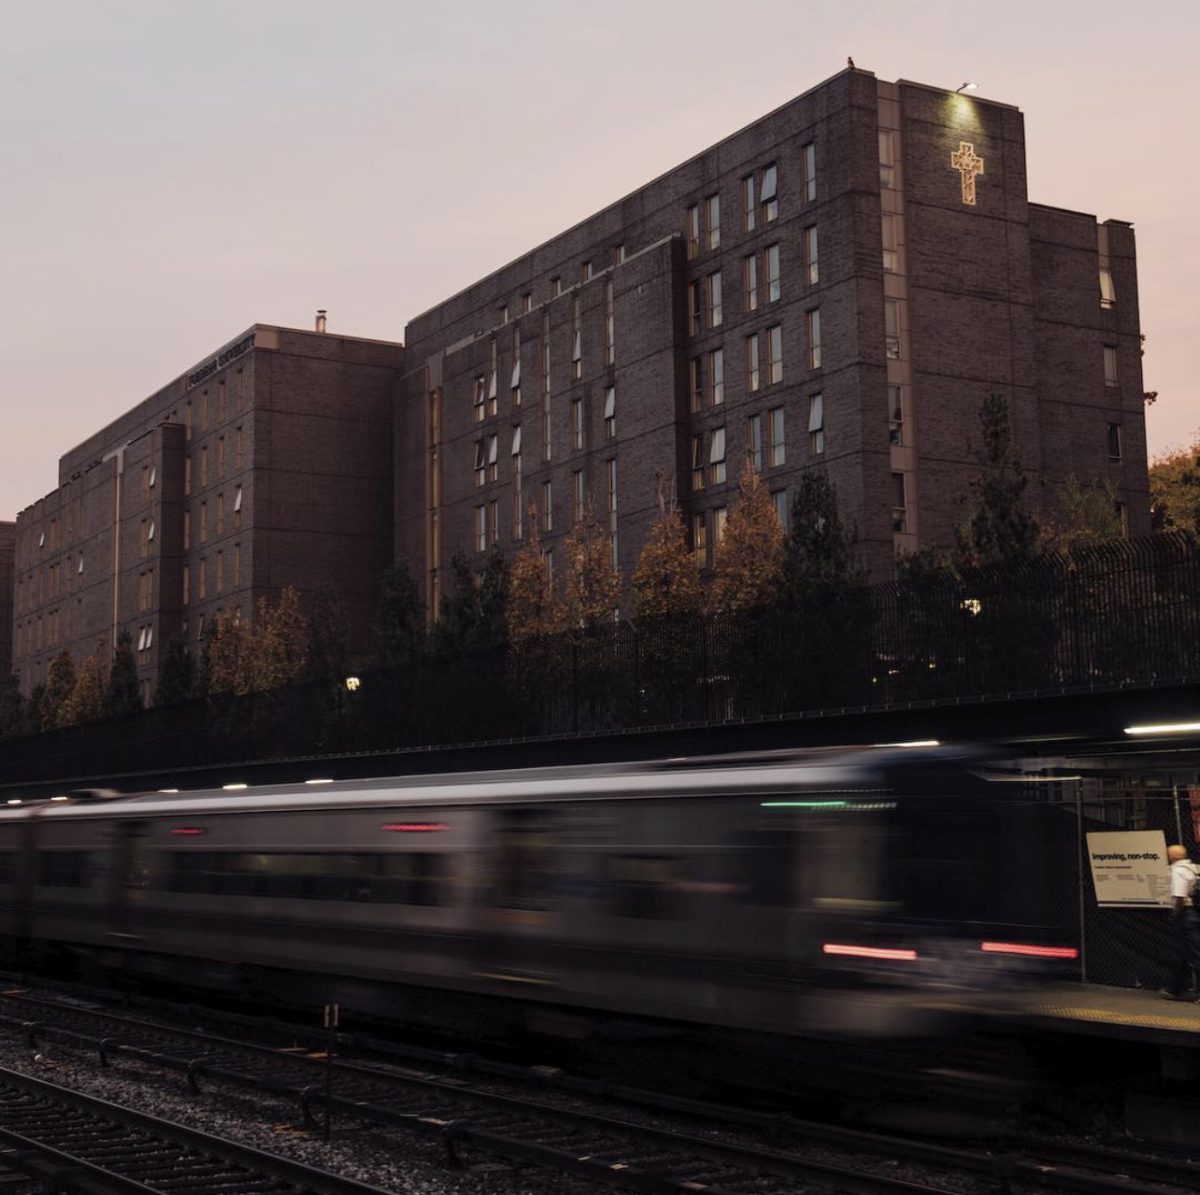 Commuters experience at Fordham differs from residents.